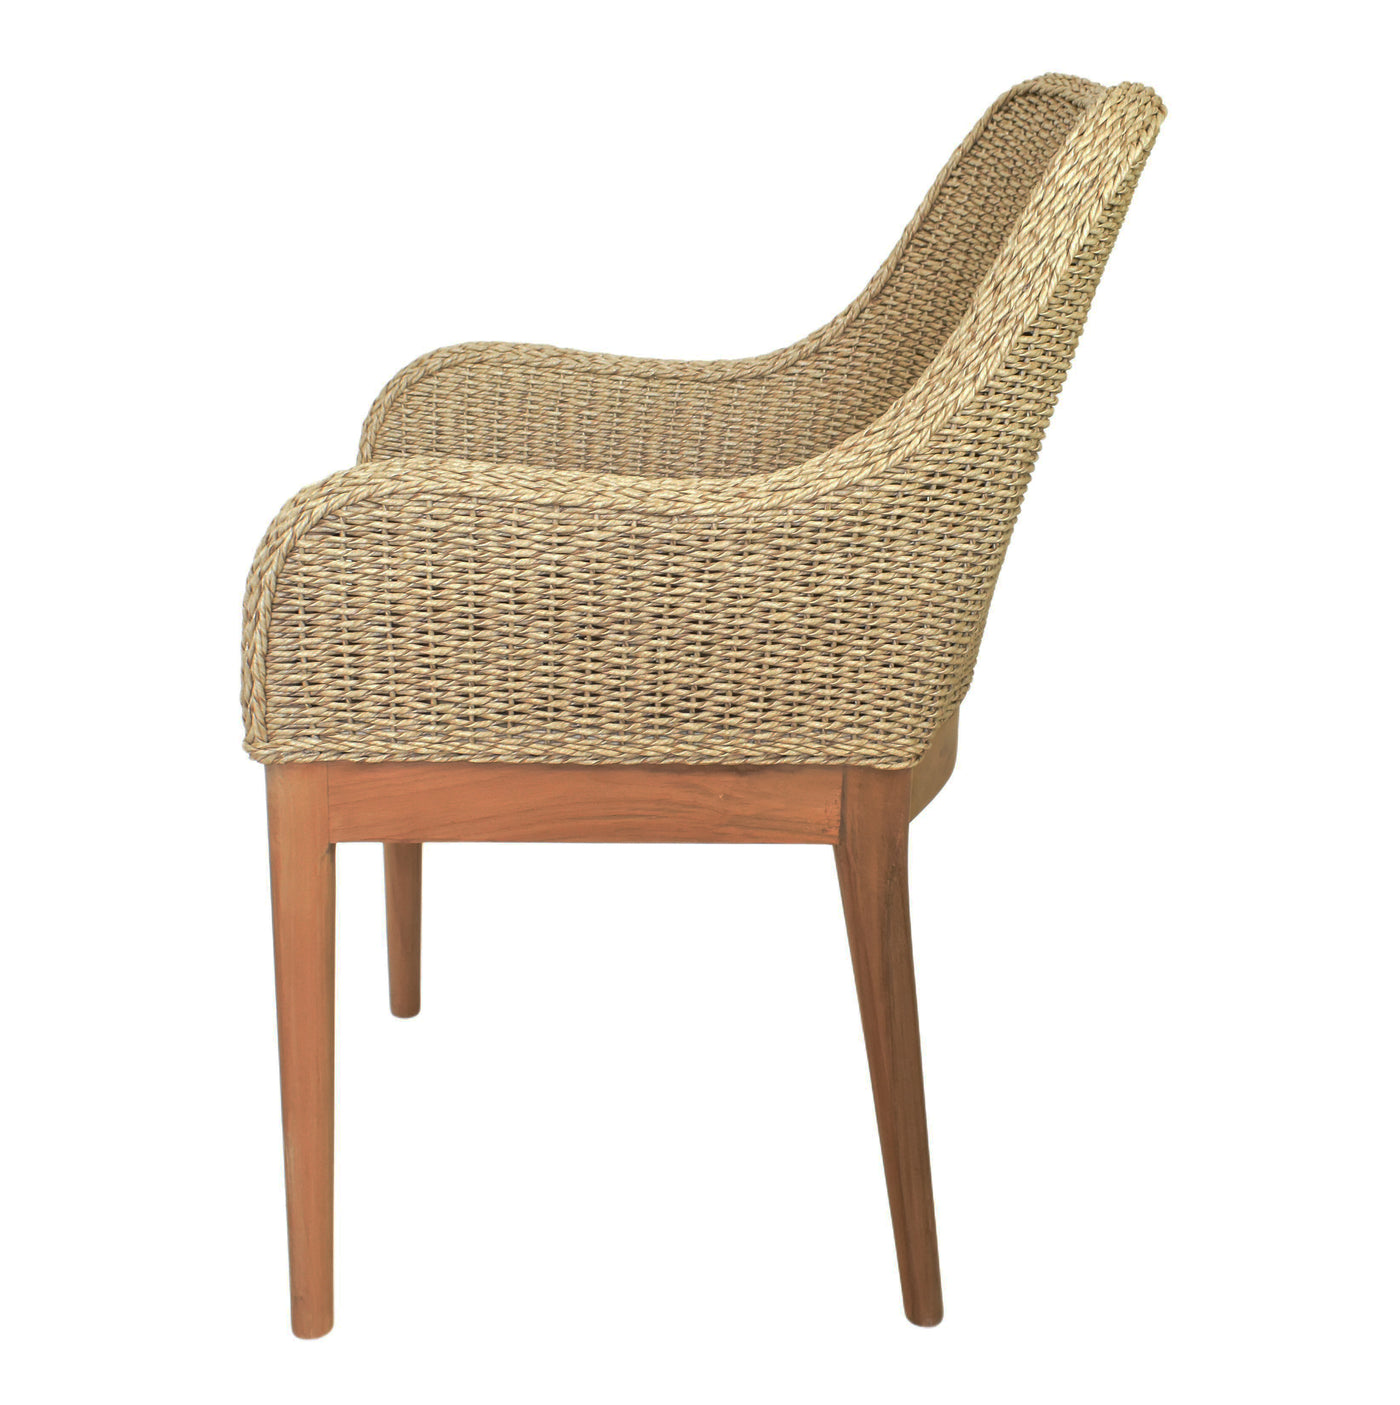 Tula Natural Rattan Outdoor Dining Chair